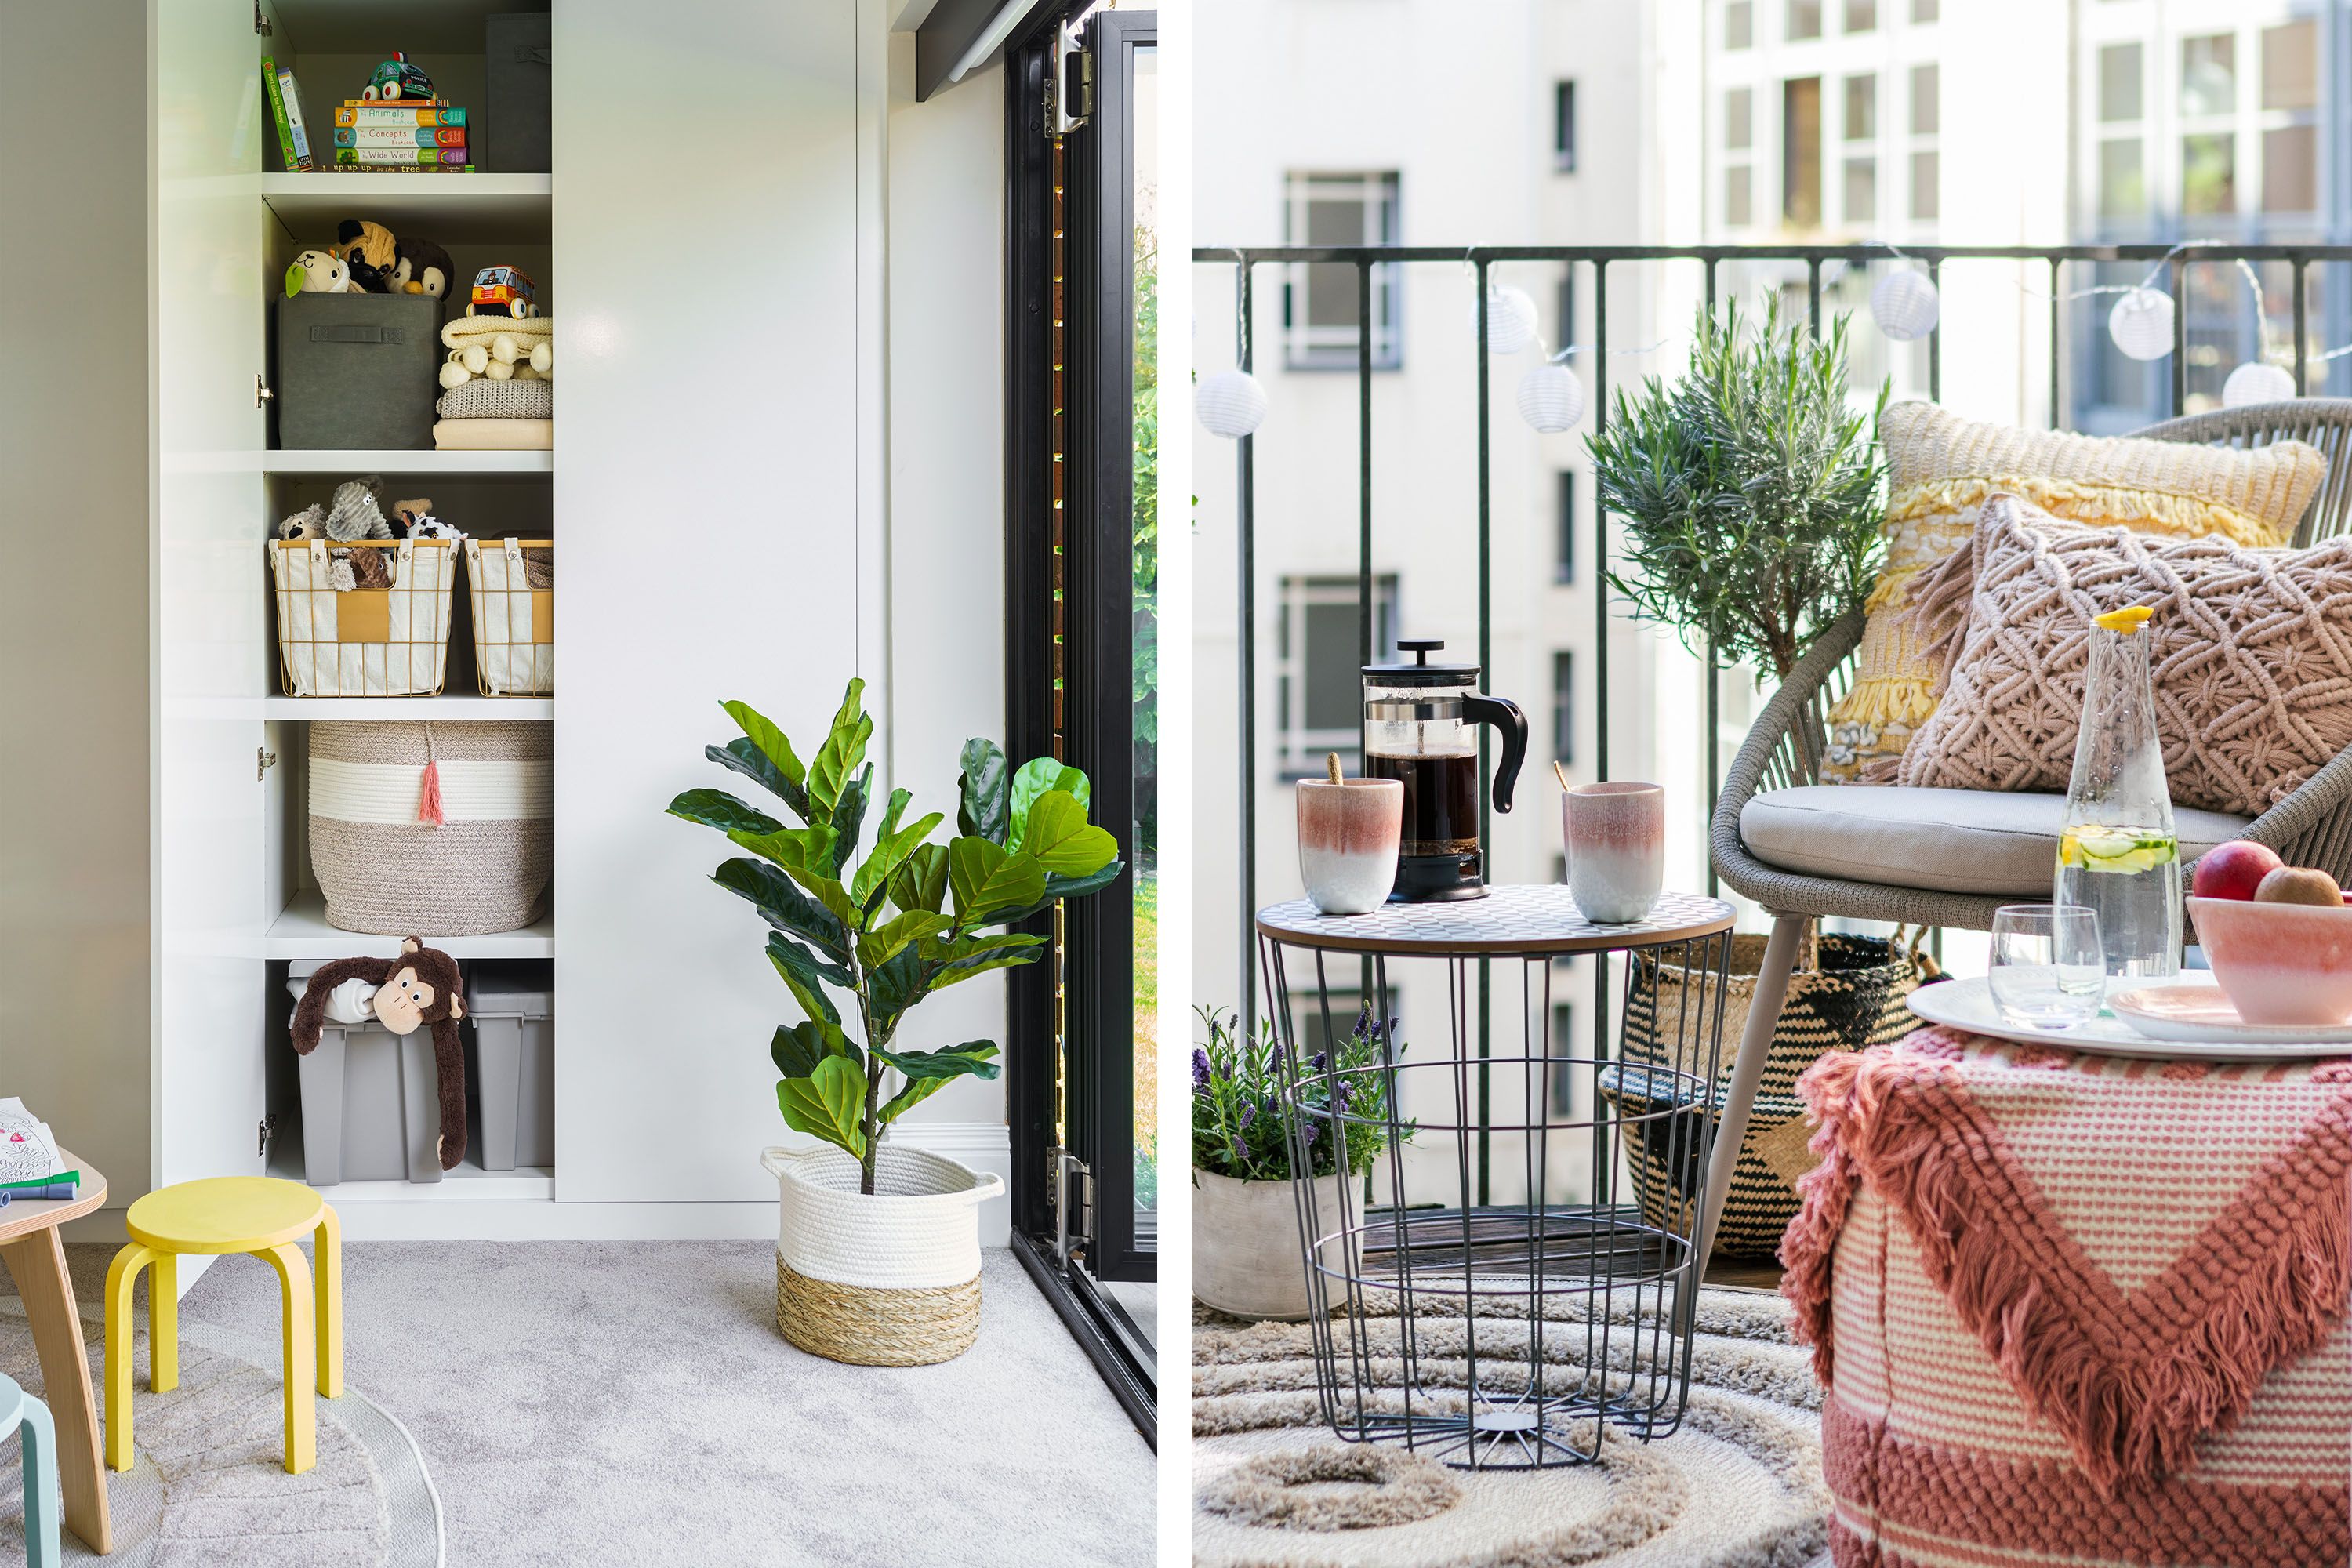 The best online homeware and interiors shops in the UK, from H&M